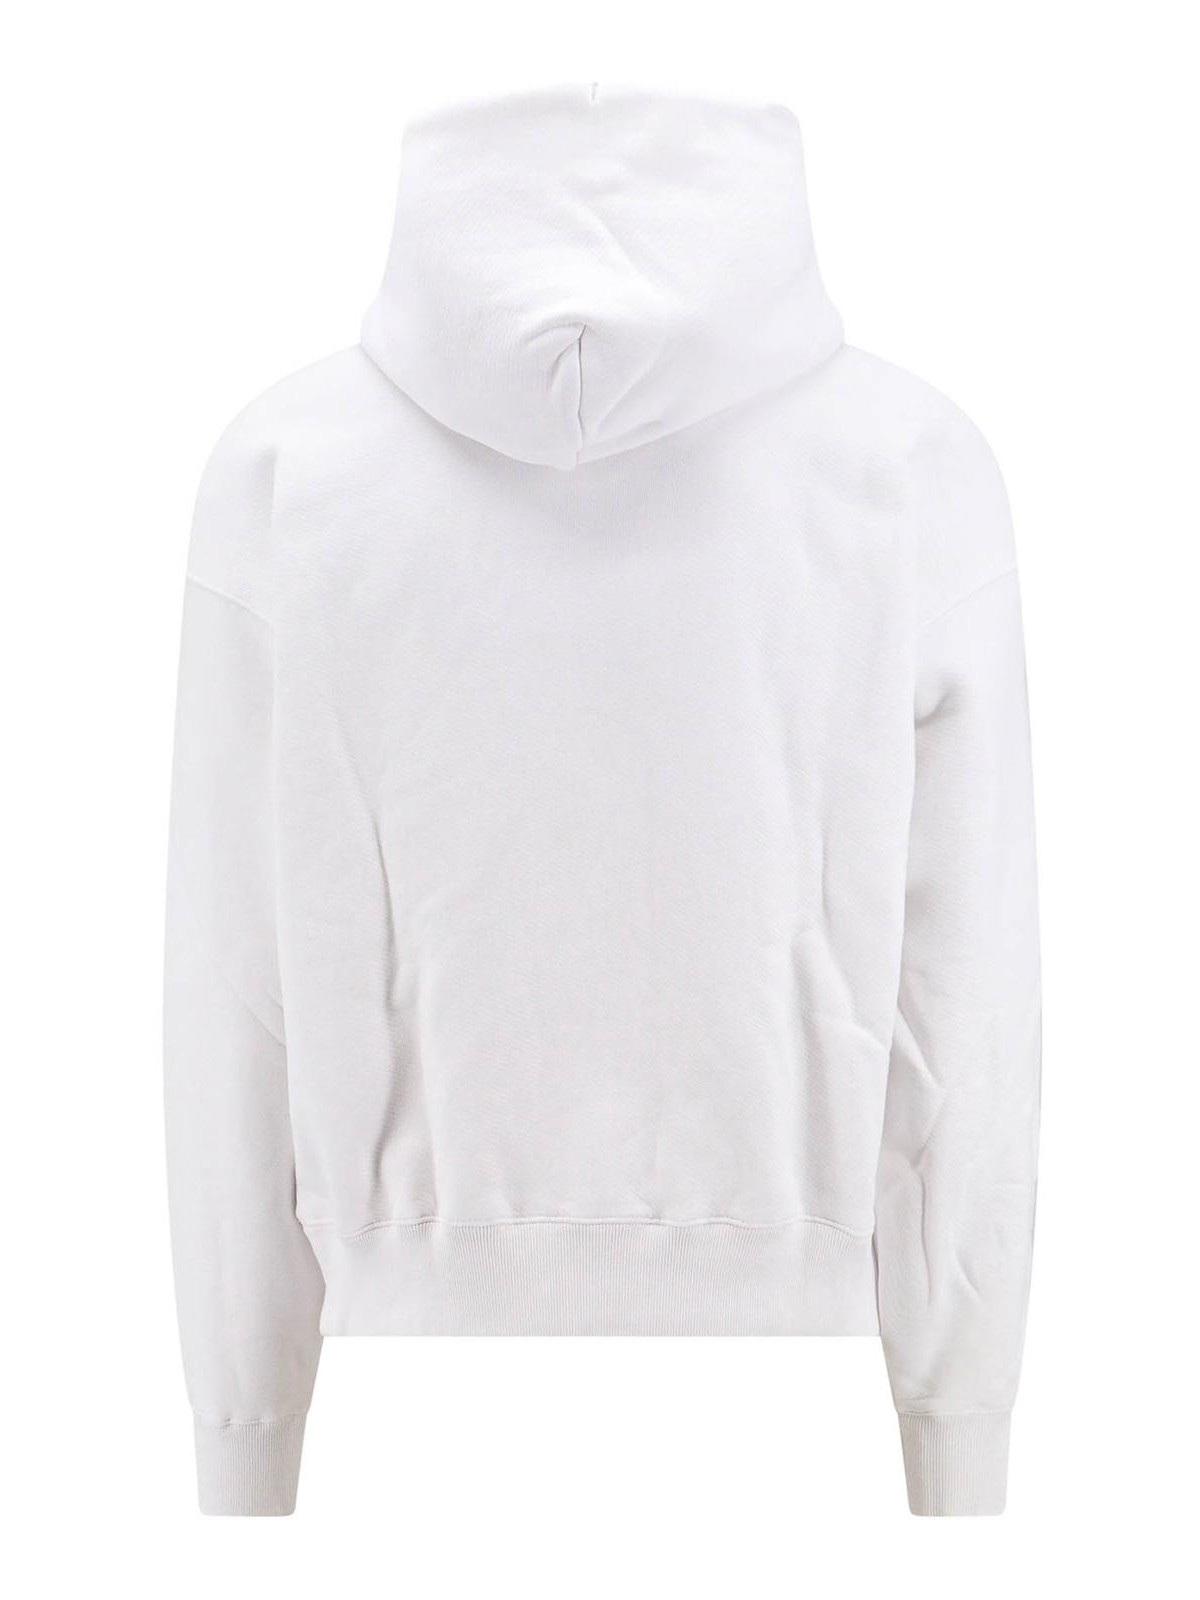 Shop Off-white Skate Cotton Sweatshirt With Off Print In Blanco